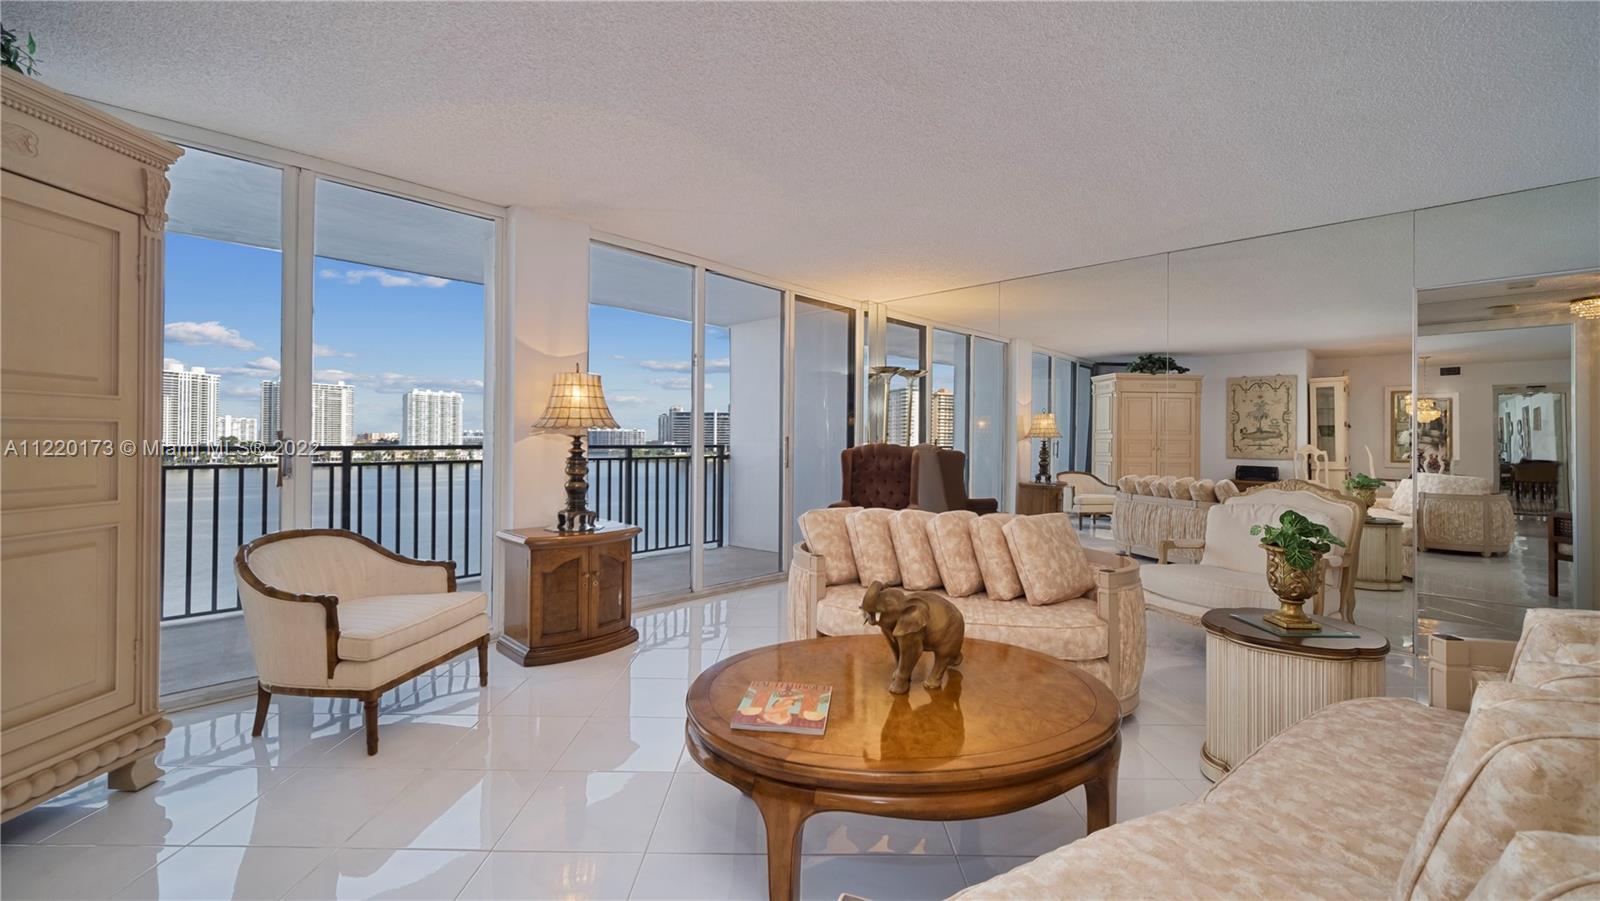 This is a true gem in the heart of Sunny Isles. Just few blocks from the beach. Ready to move in. Ma